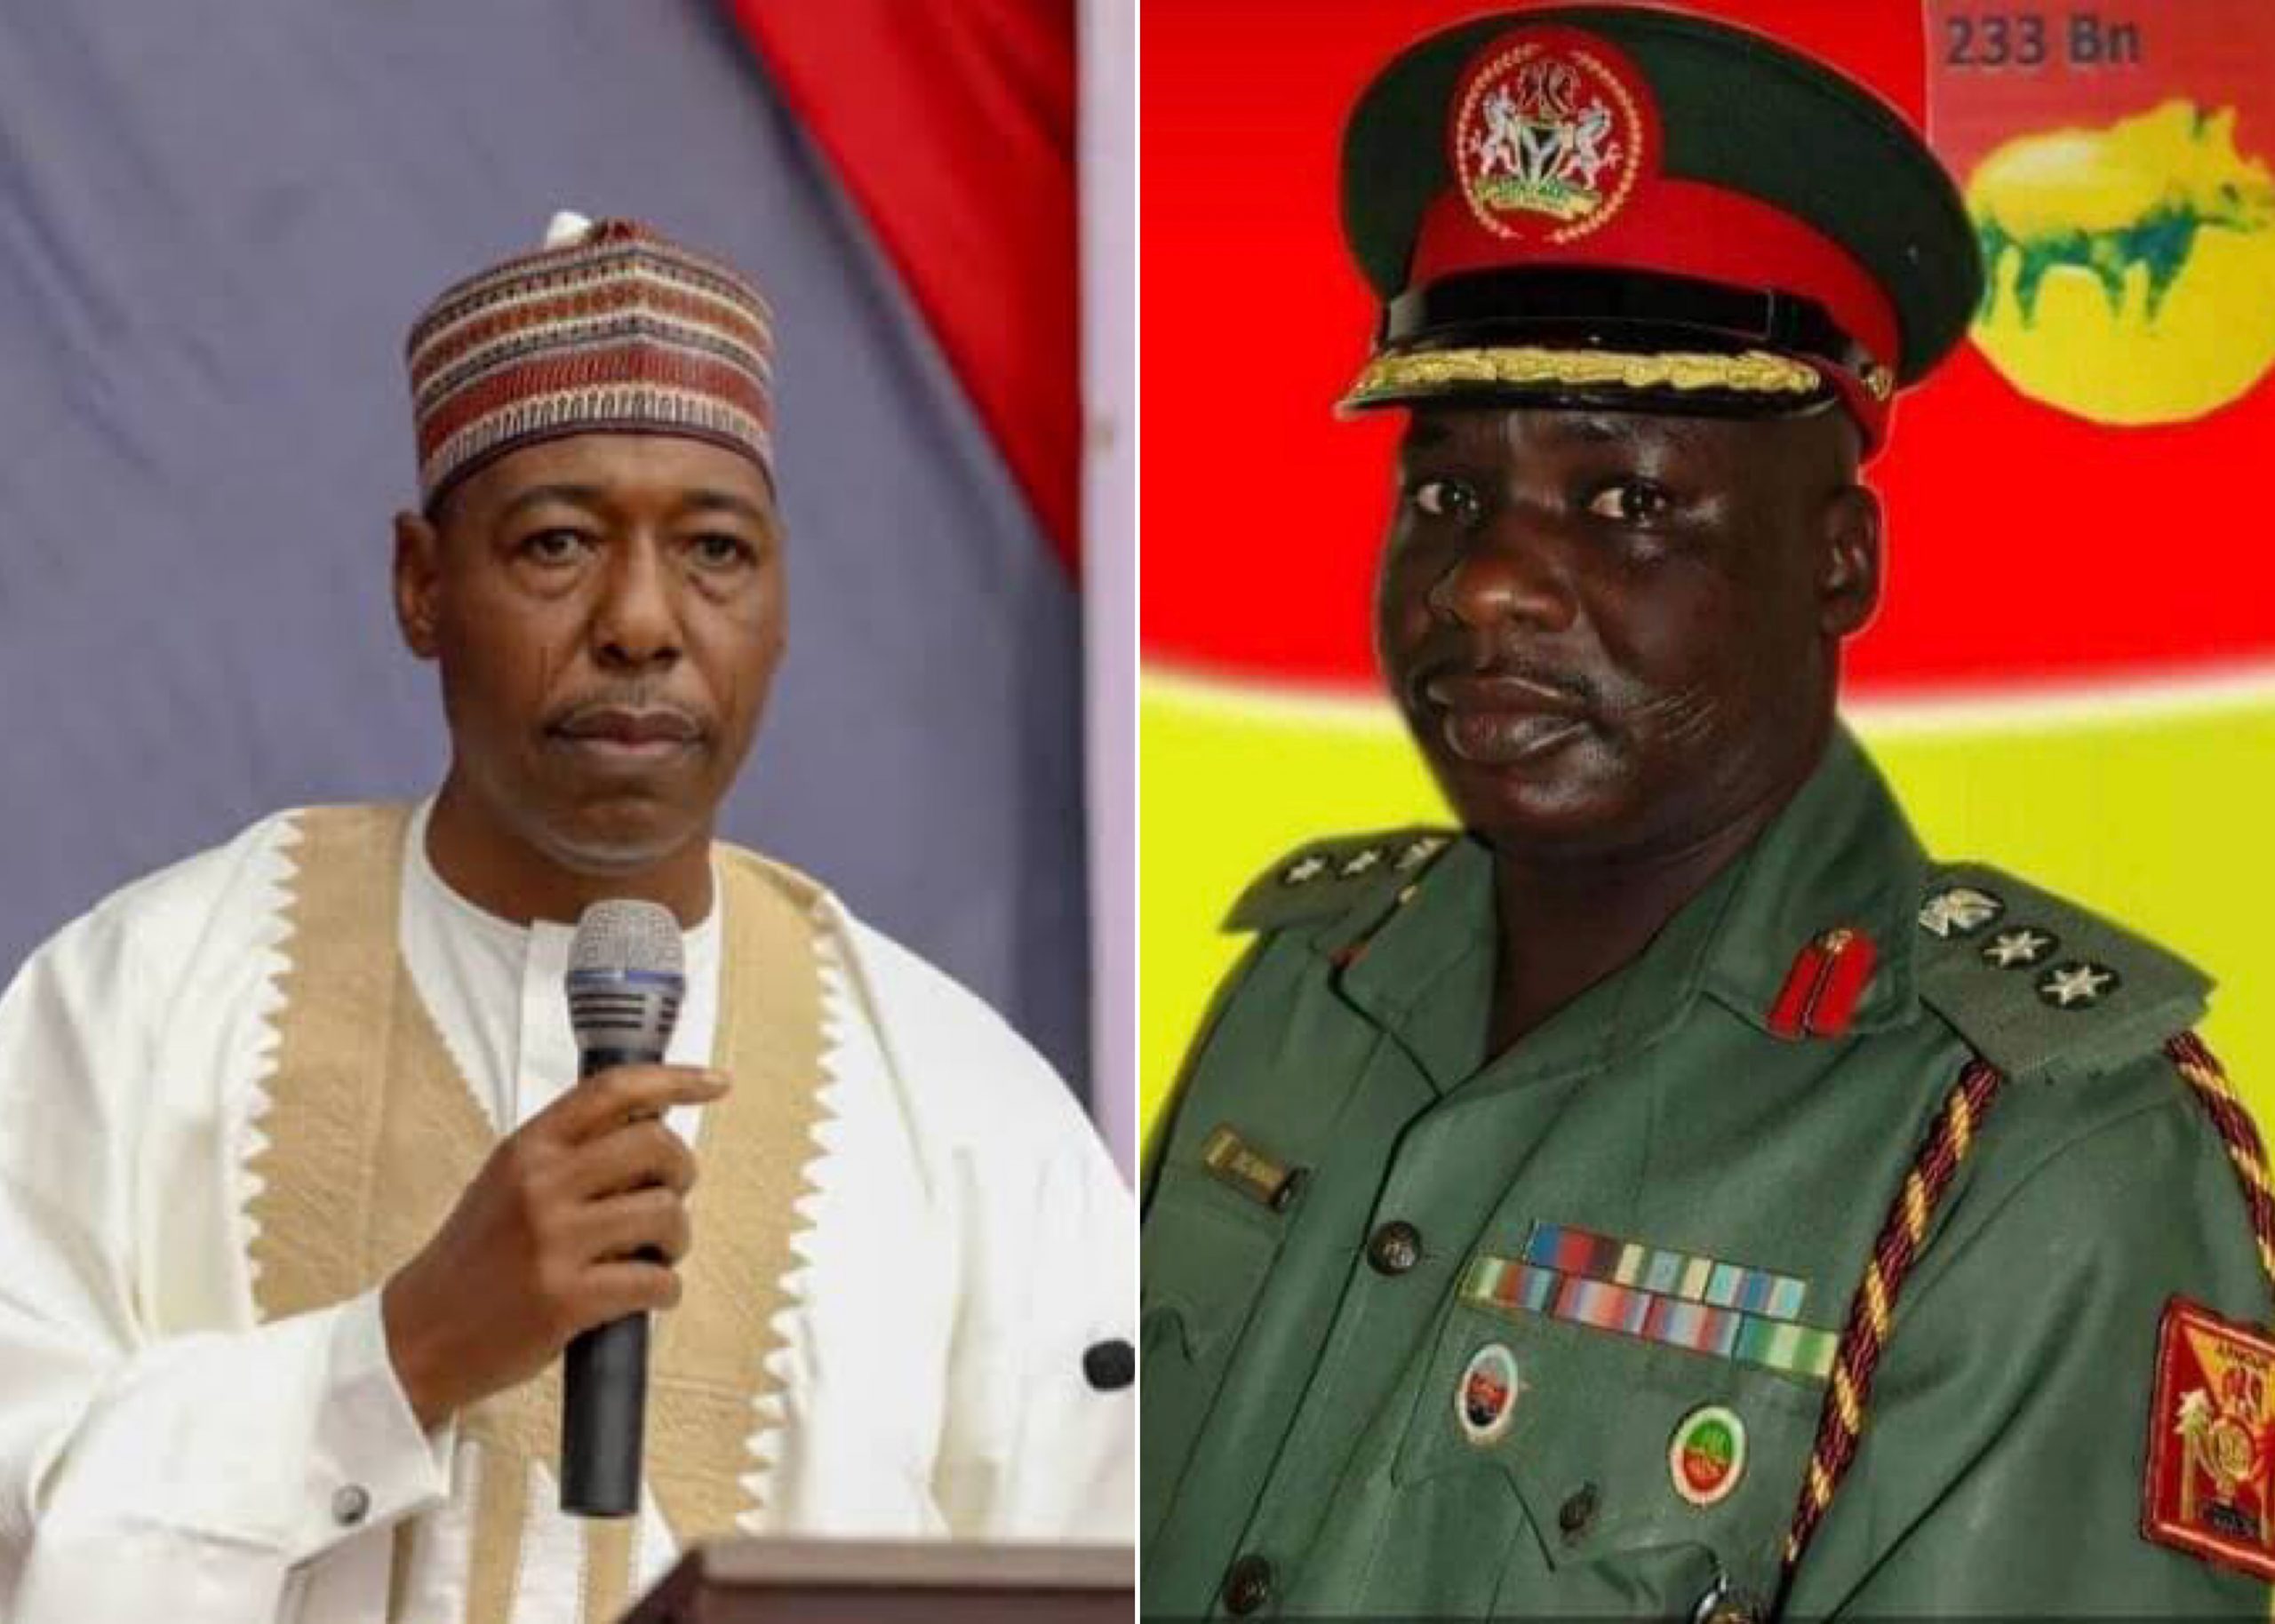 Gov Zulum Fulfills N20m Pledge, Presents Cheque To Widow Of Army Commander Killed By Boko Haram